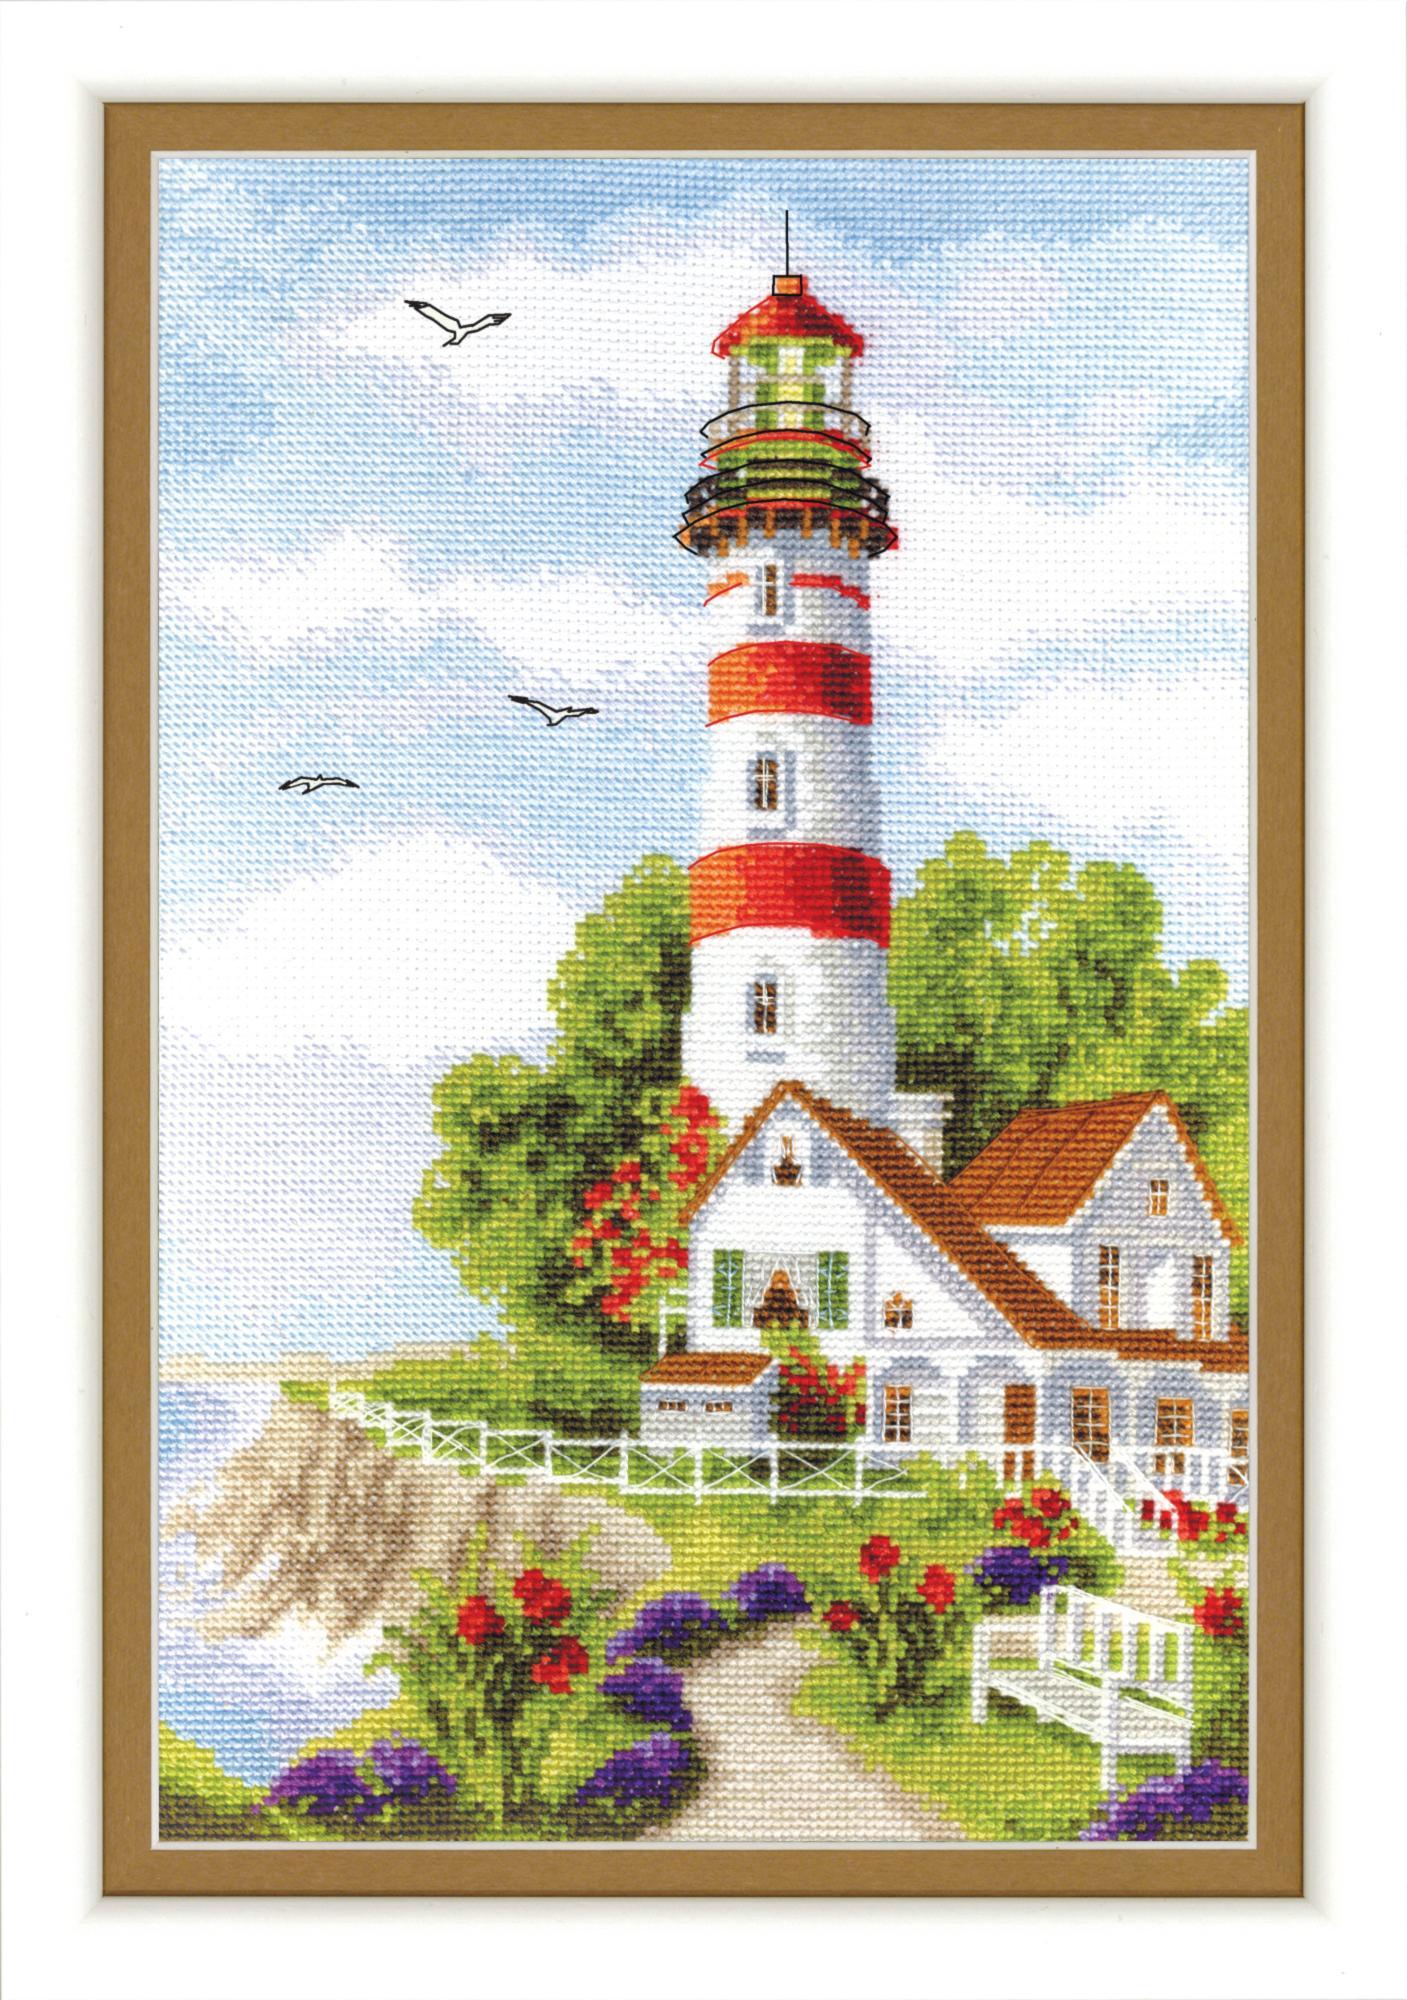 AT THE NATIVE COAST, Counted Cross Stitch Kit, 16 count Aida, size 17,5 x 26,5 cm, Charivna mit | Momentos Magicos (M-264)